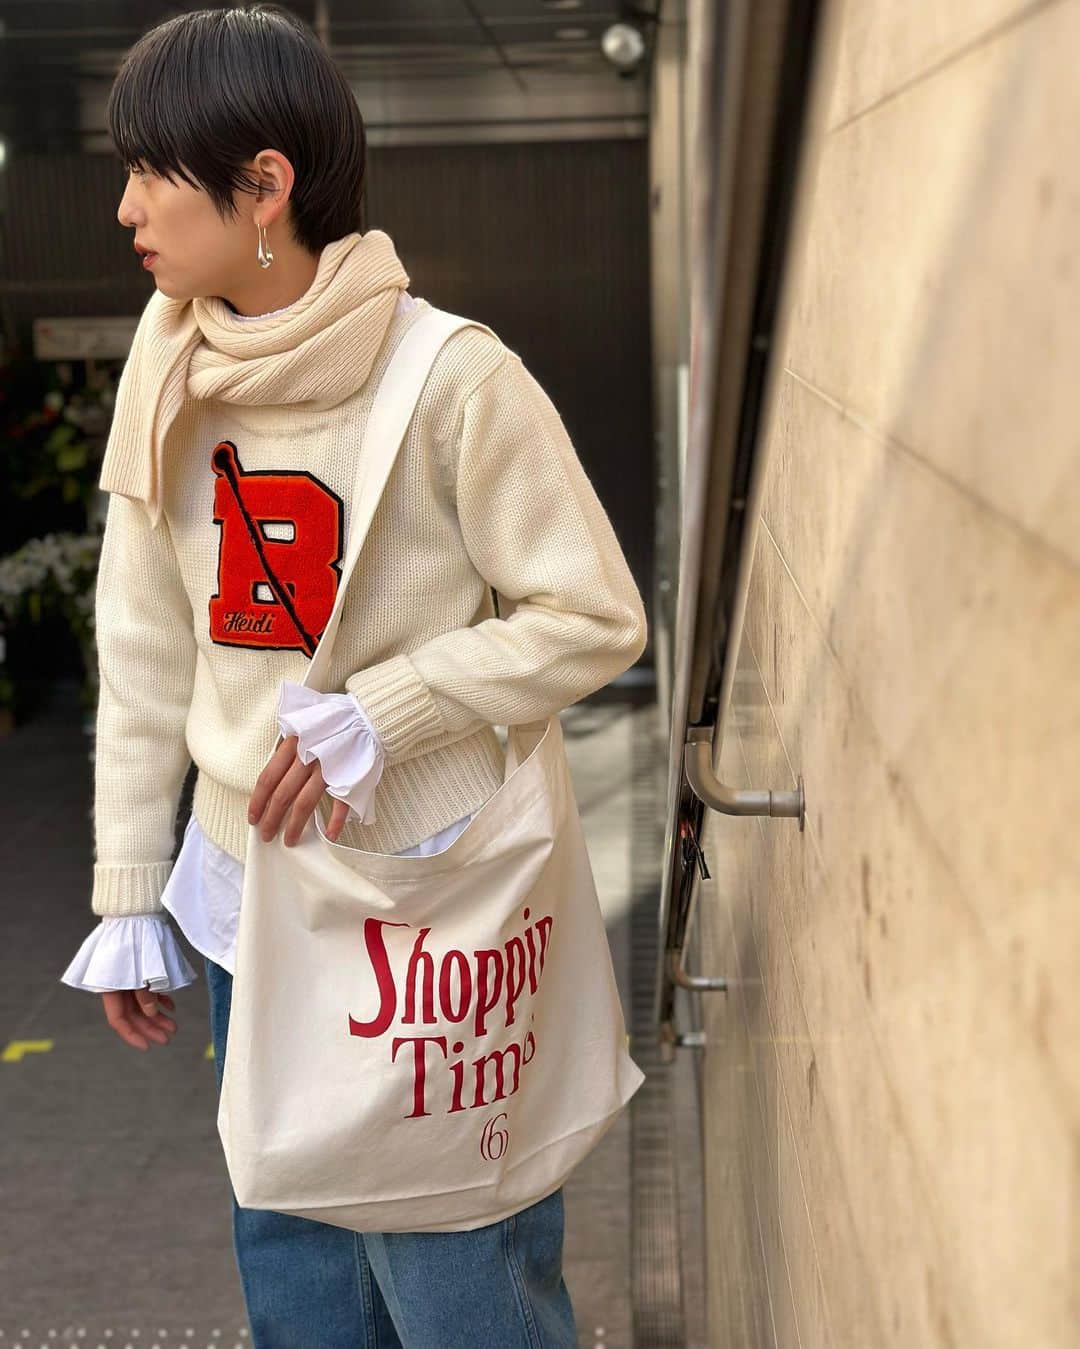 6(ROKU) OFFICIALのインスタグラム：「-  〈6〉“Shopping Times” TOTE BAG ¥6,600- tax in COLOR：WHITE/BLUE 6 AOYAMA店のみの販売となります。  ＜Bourrienne Paris X × 6＞BOUDOIR CASA ¥52,800- tax in  knit(vintage)  @westoveralls pants ¥29,700- tax in  @greenthomasaccessories muffler ¥17,600- tax in  #roku #westoveralls #greenthomas #greenthomasaccessories」